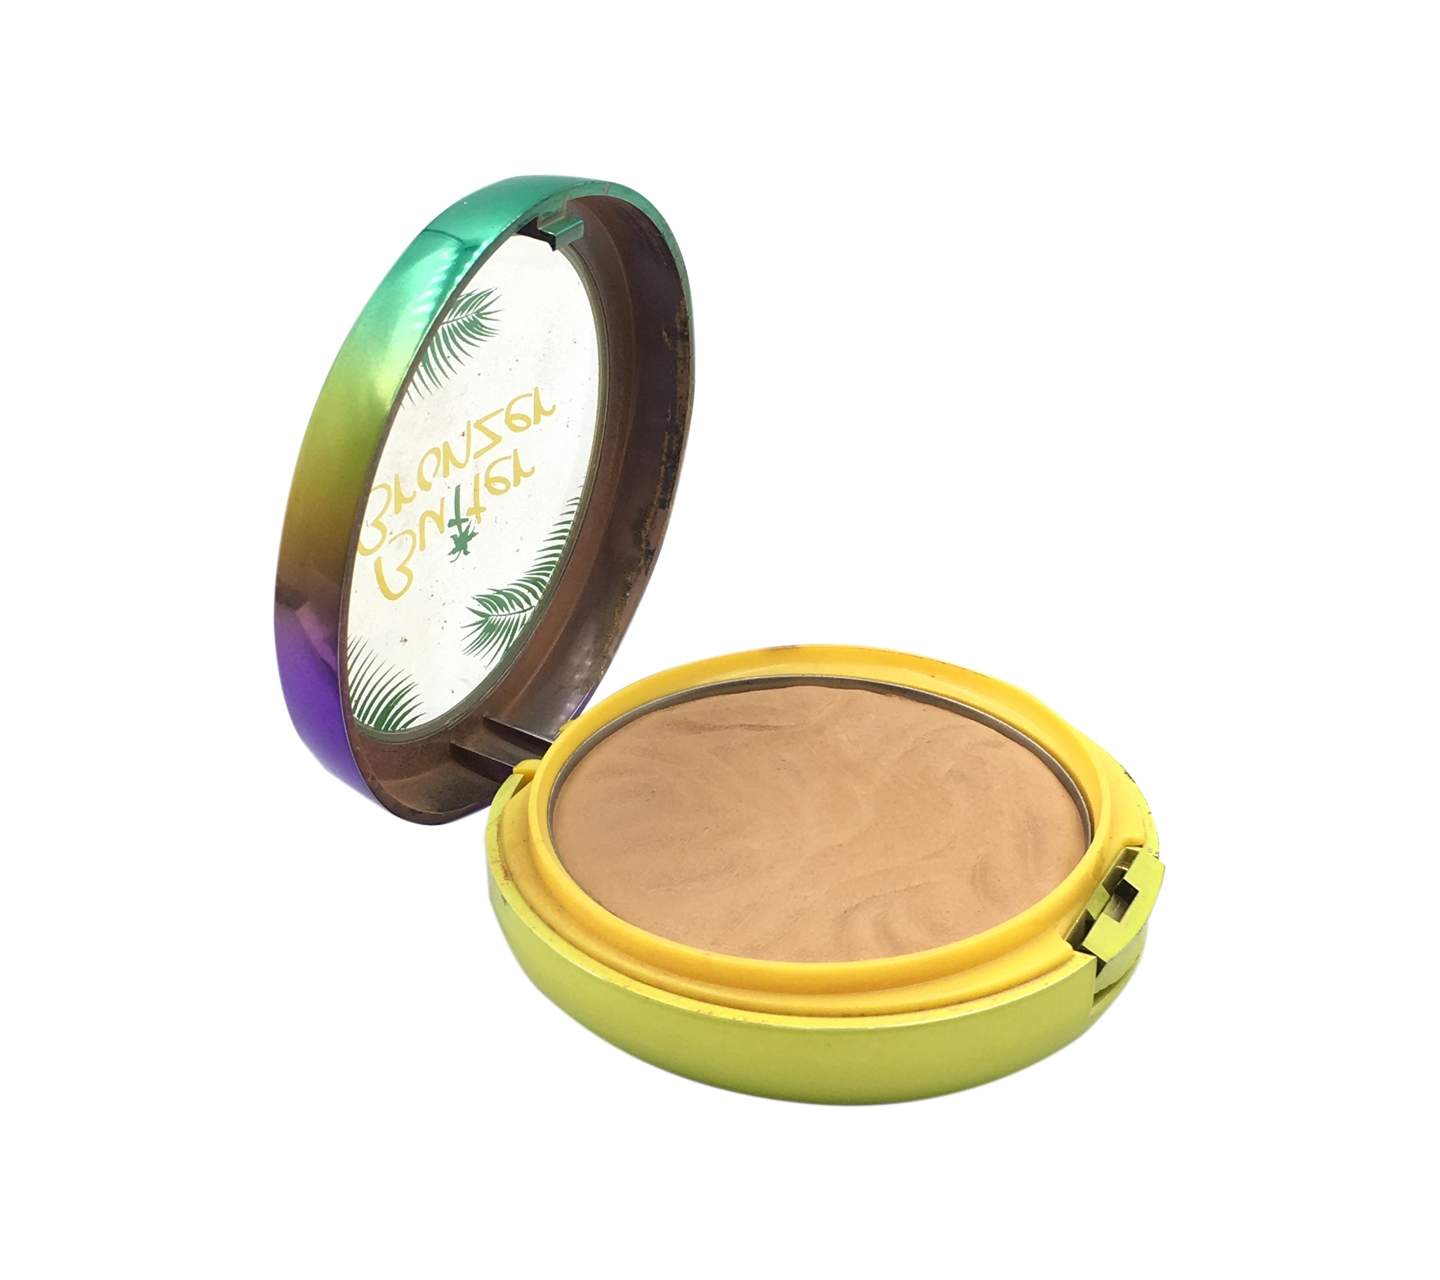 Physicians formula butter bronzer ultra-rich bronzer delivers a tropical glow